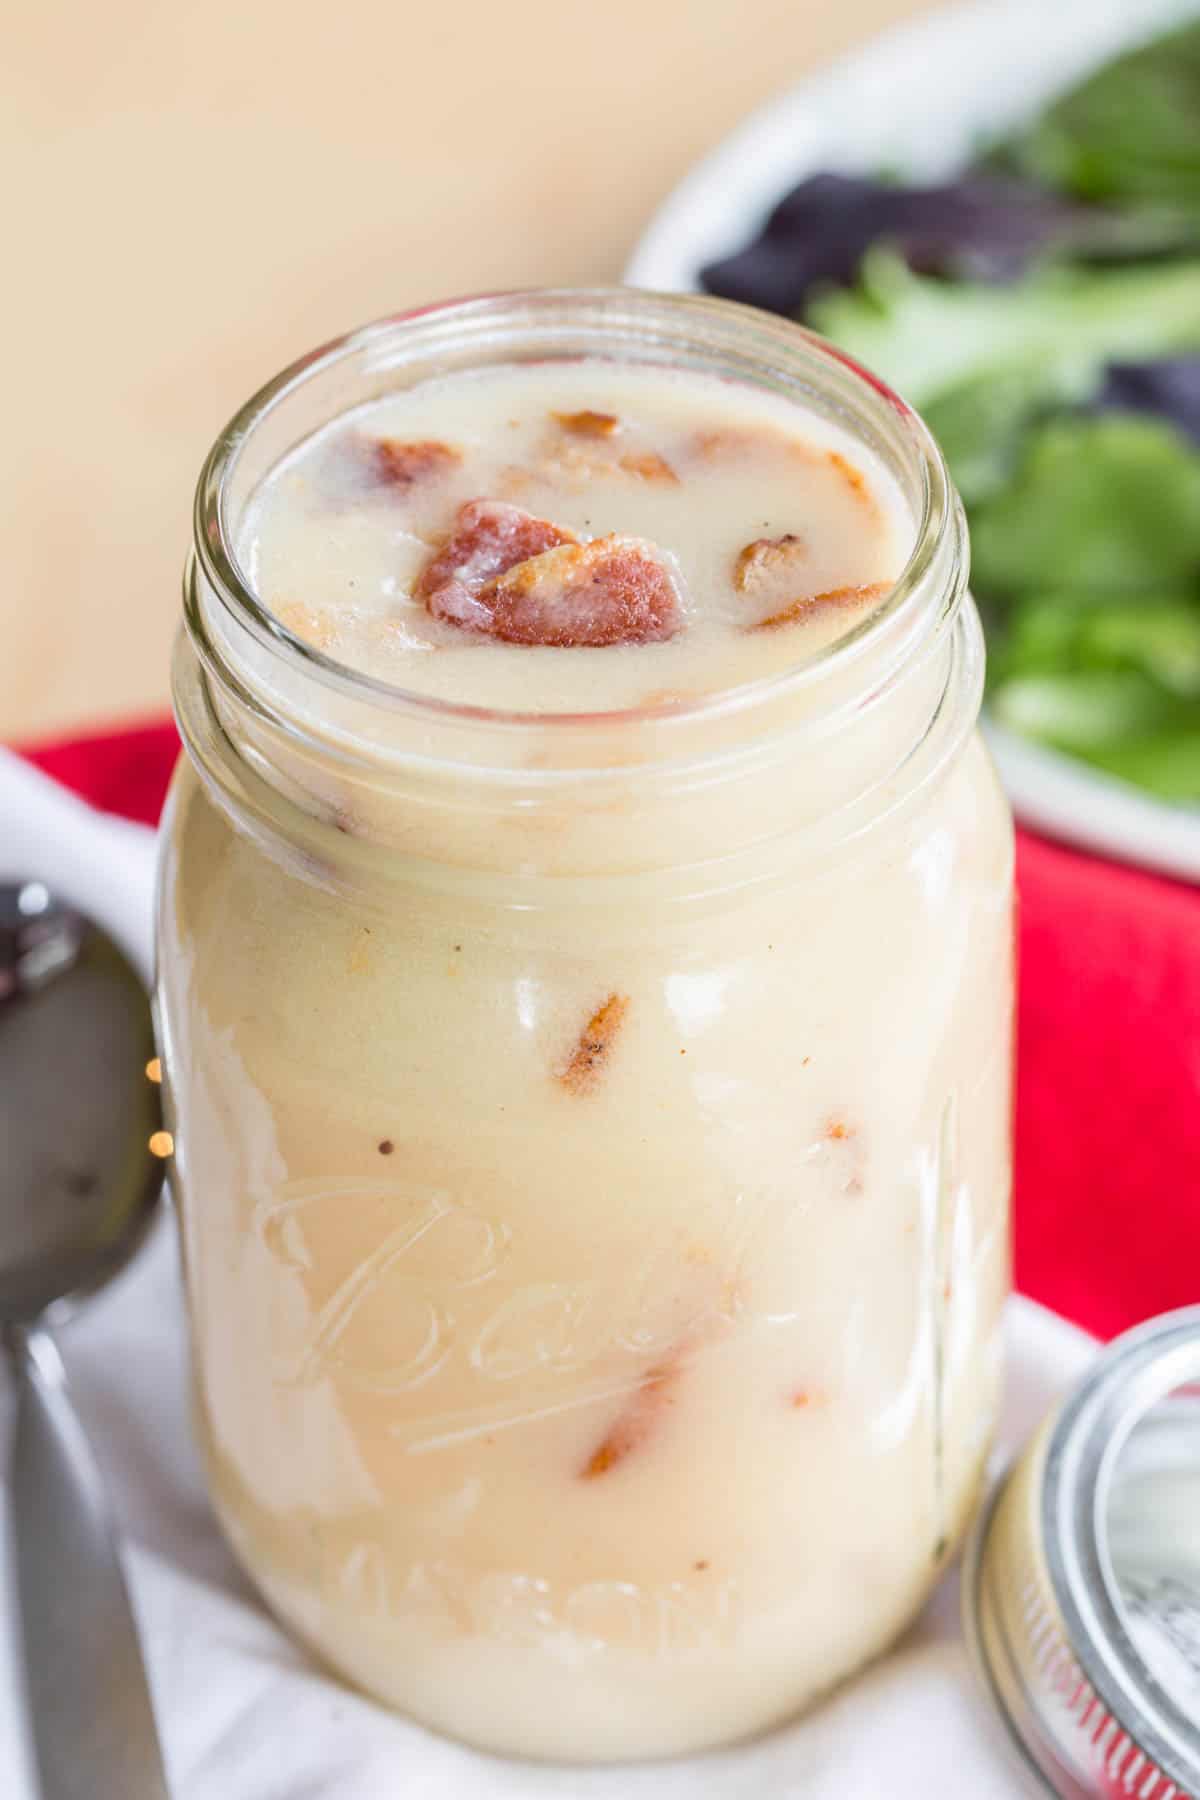 A glass jar filled with warm bacon dressing with a plate of lettuce behind it.